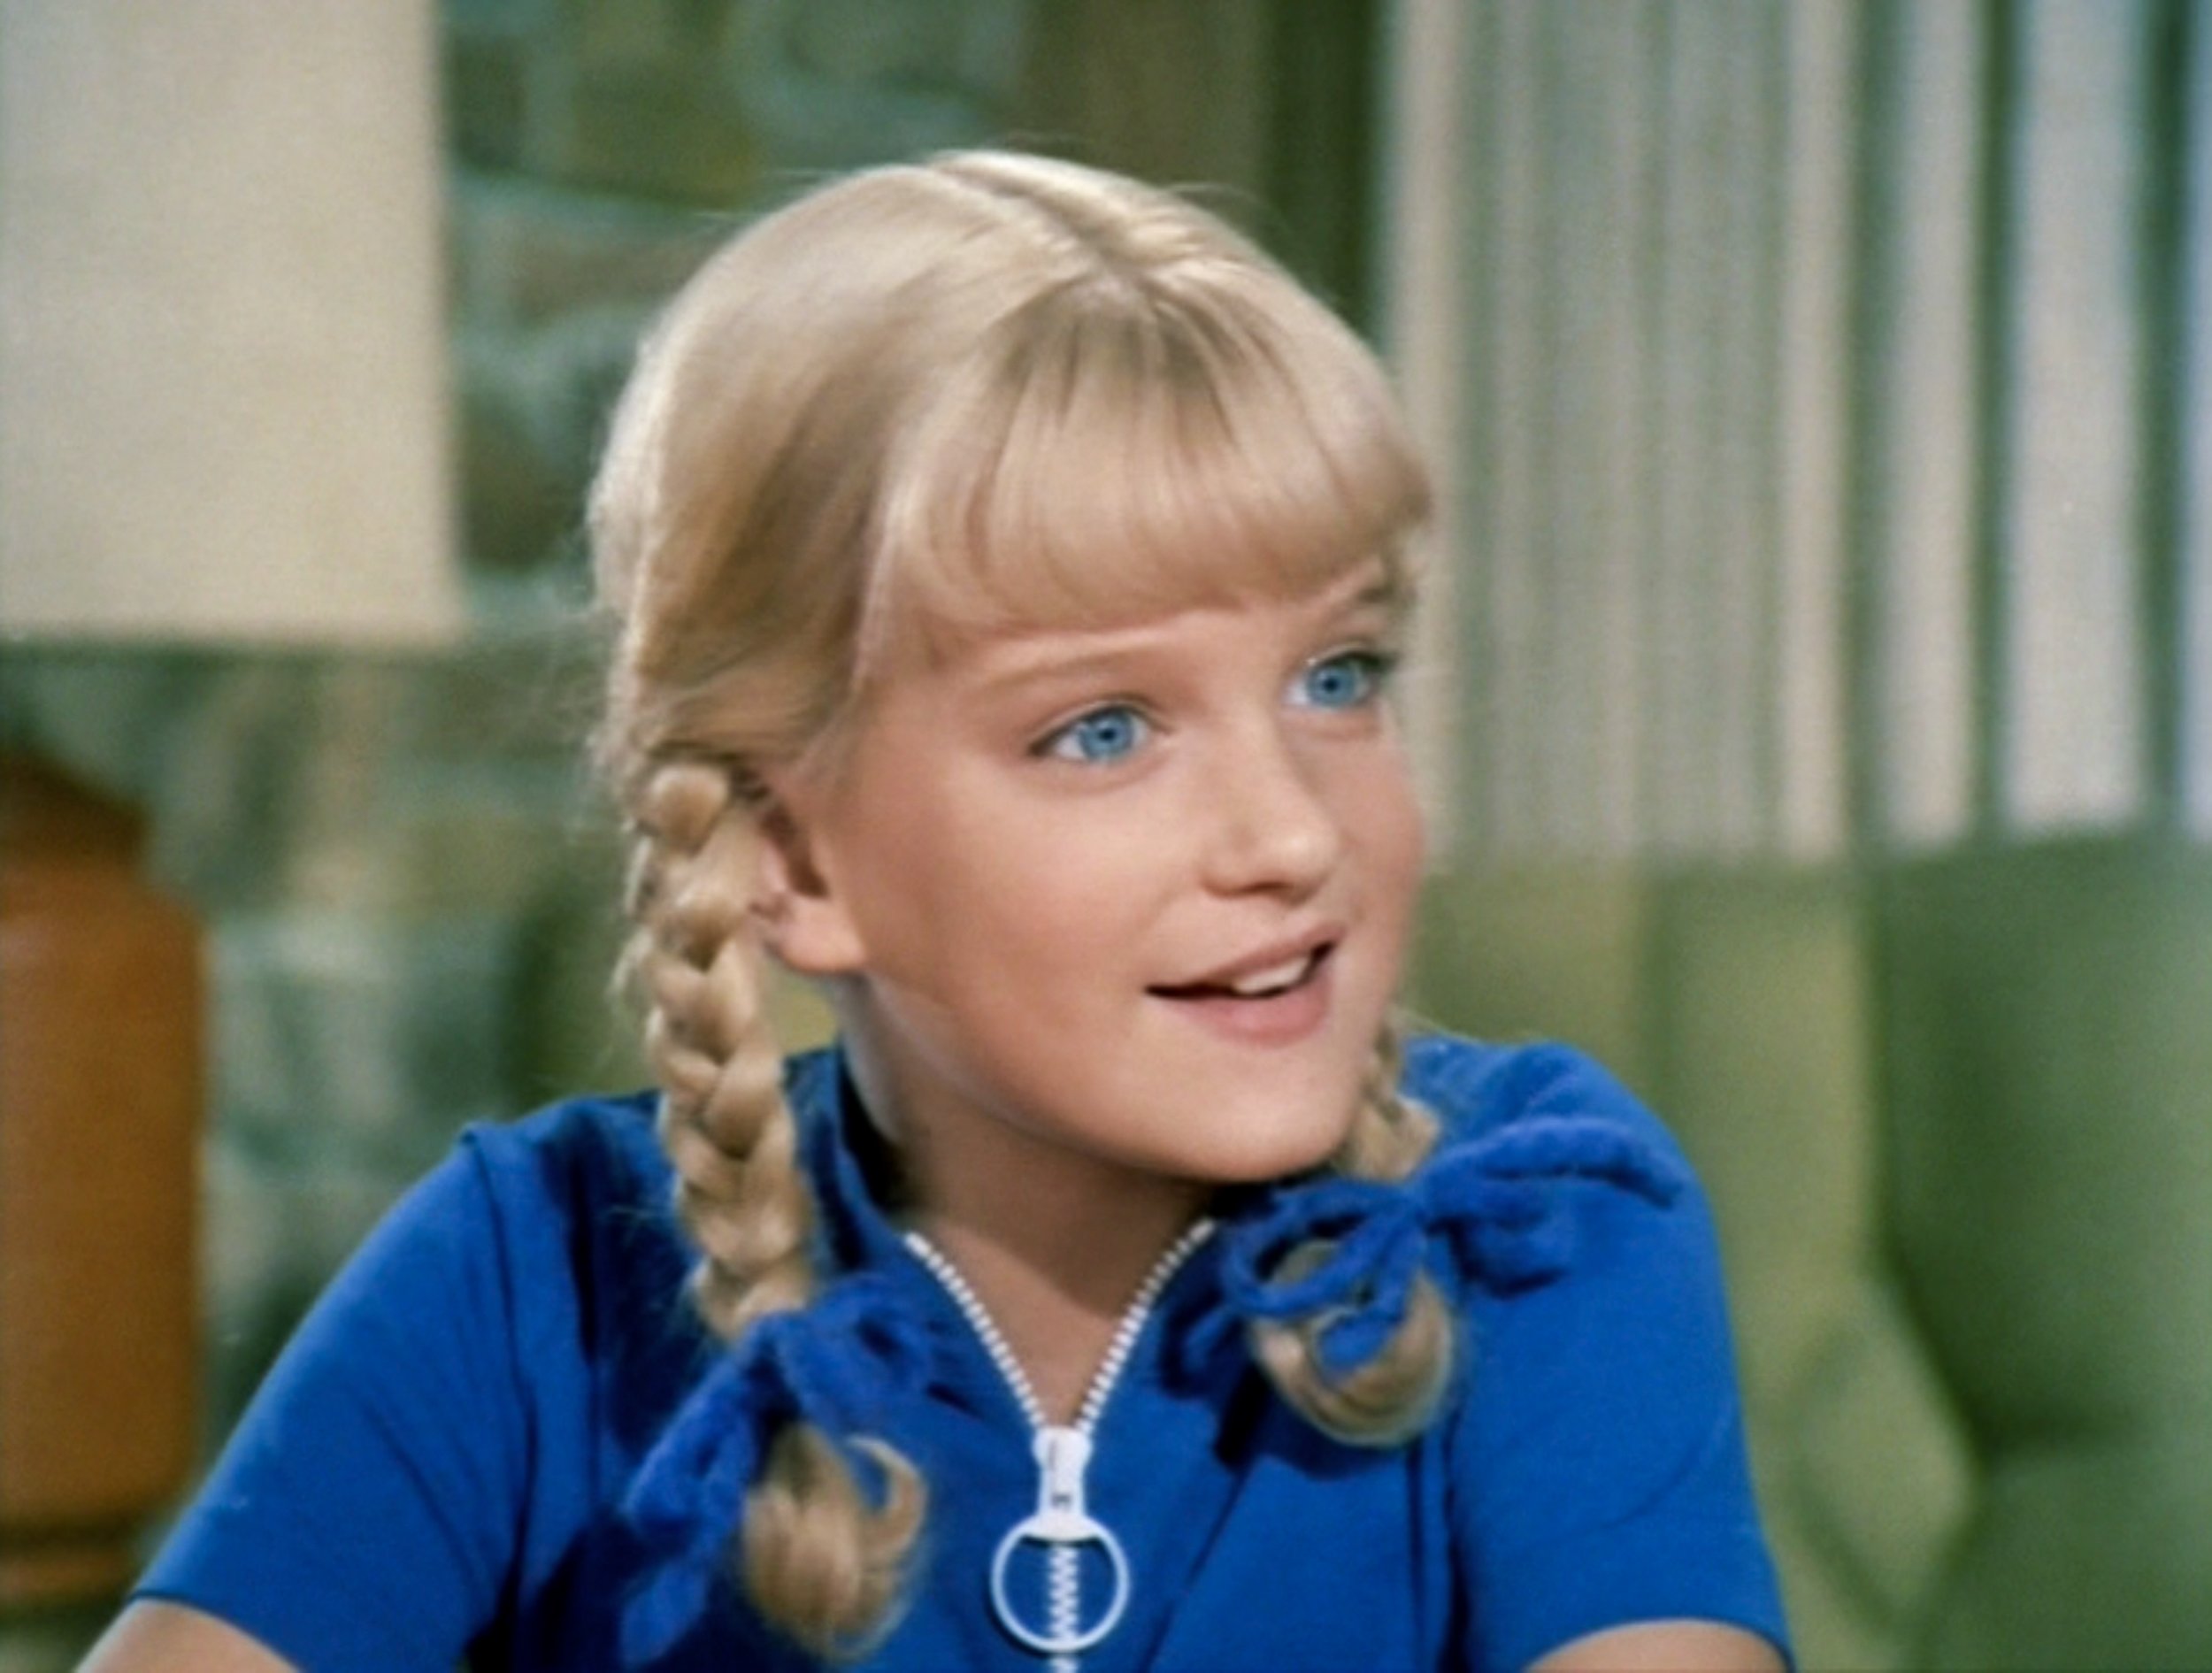 The Brady Bunch Why Susan Olsen Was Hired As Cindy Brady Even Though She Never Read A Script